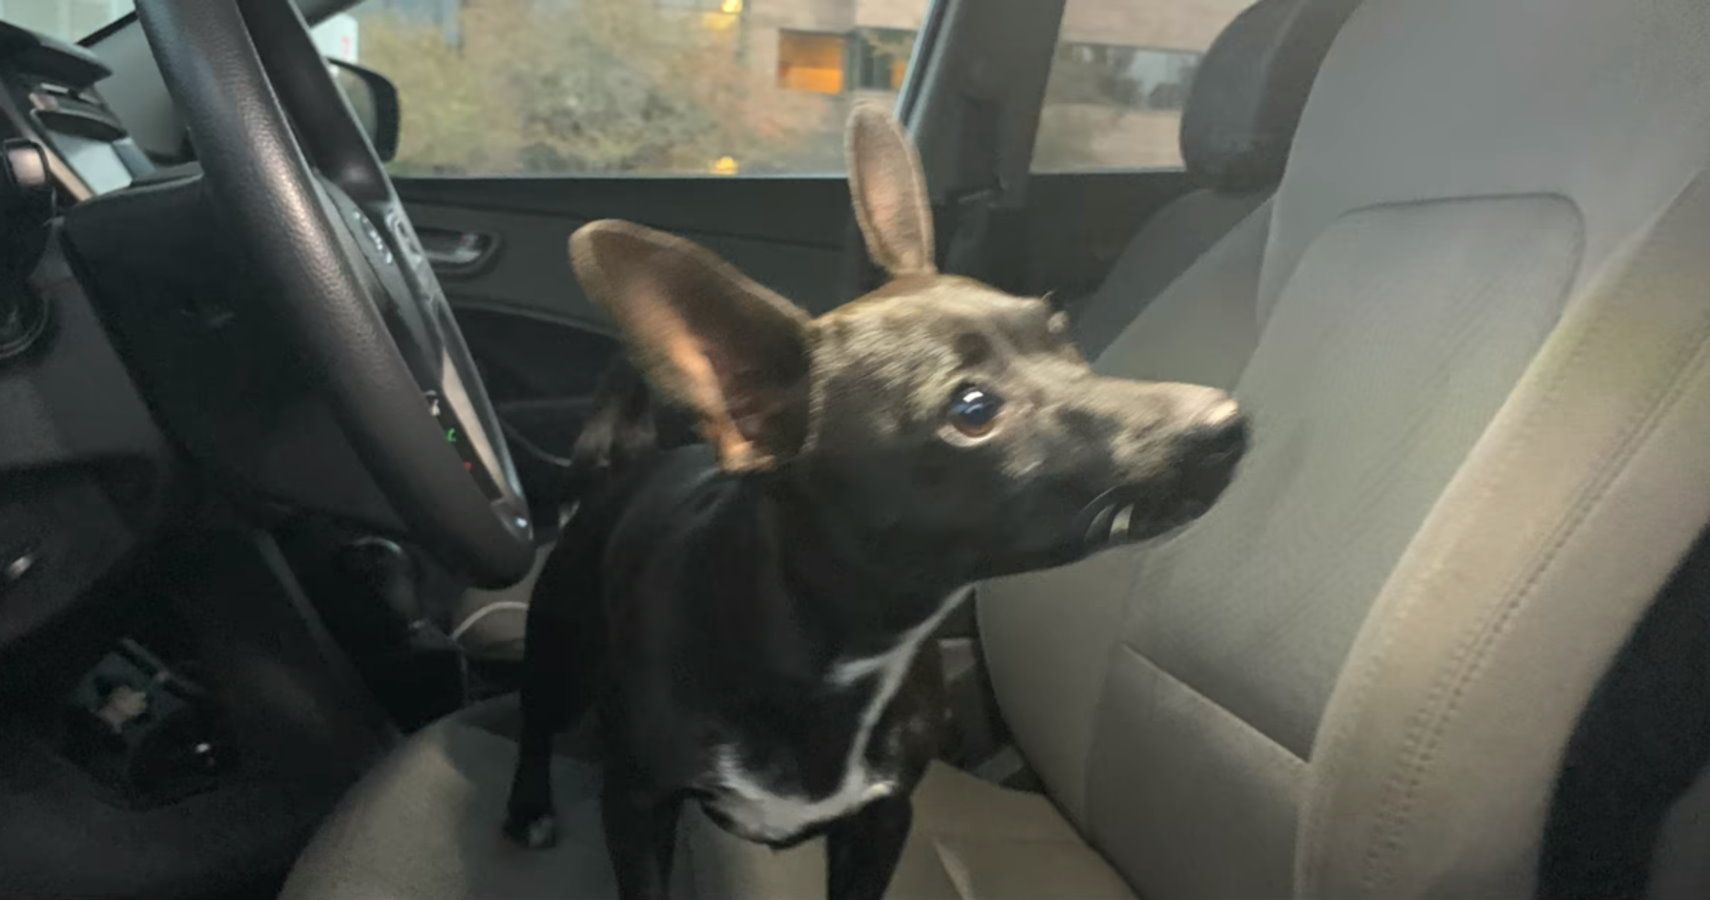 Chihuahua Steals Car While Owner Is Getting Gas